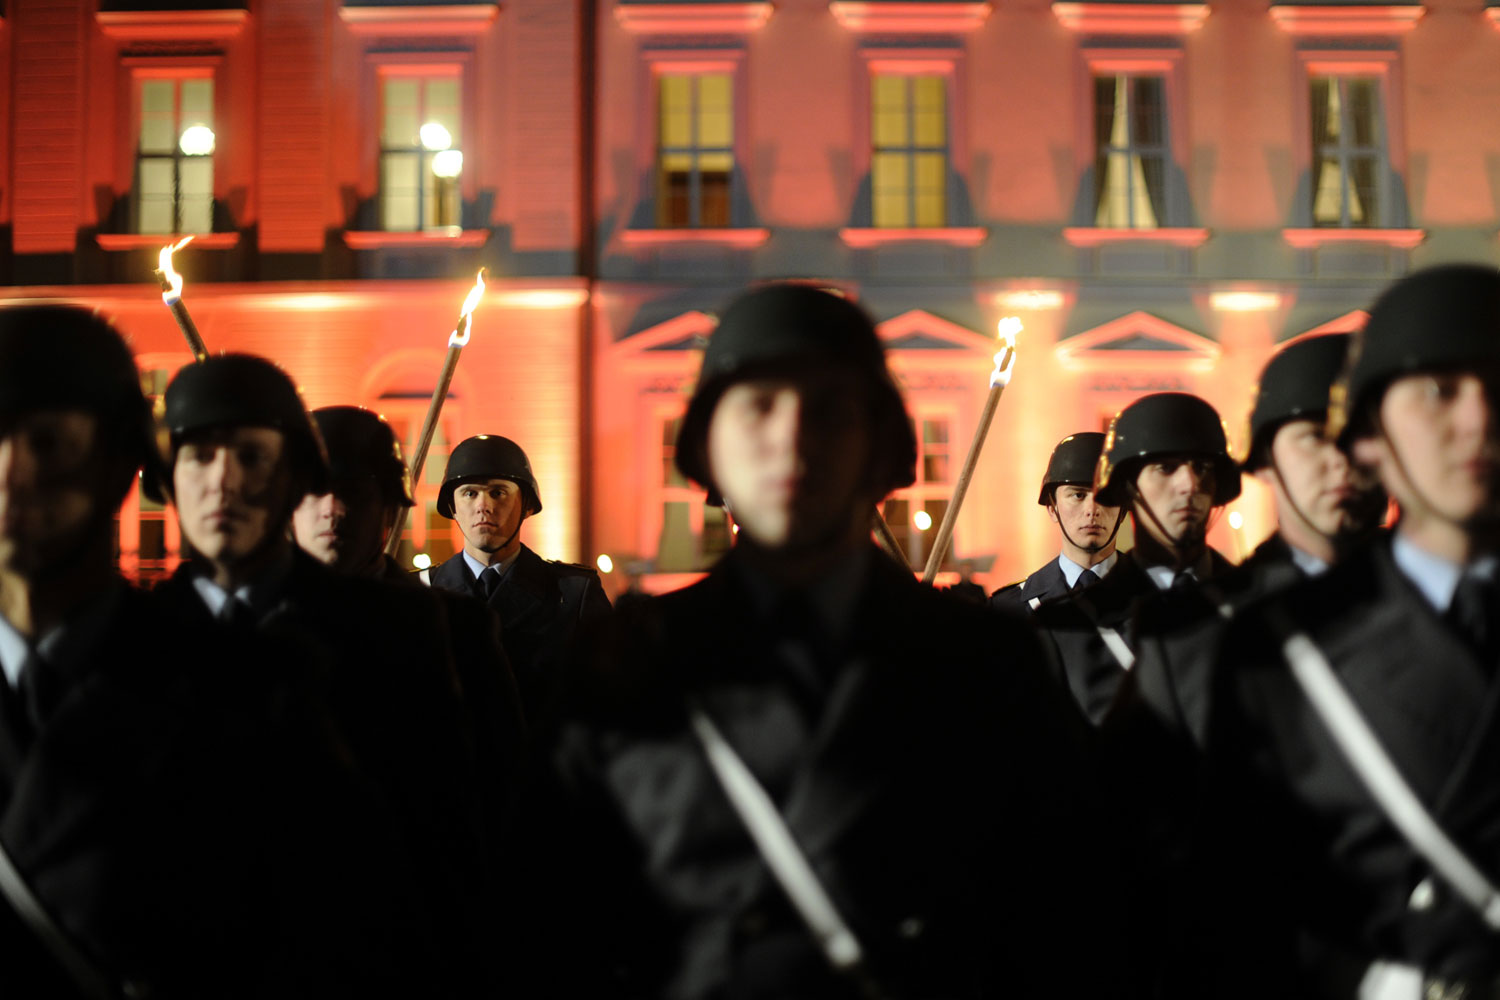 March 8, 2012. Soldiers of the German armed forces Bundeswehr carry torches during a farewell ceremony for the former German President at Bellevue Palace in Berlin.